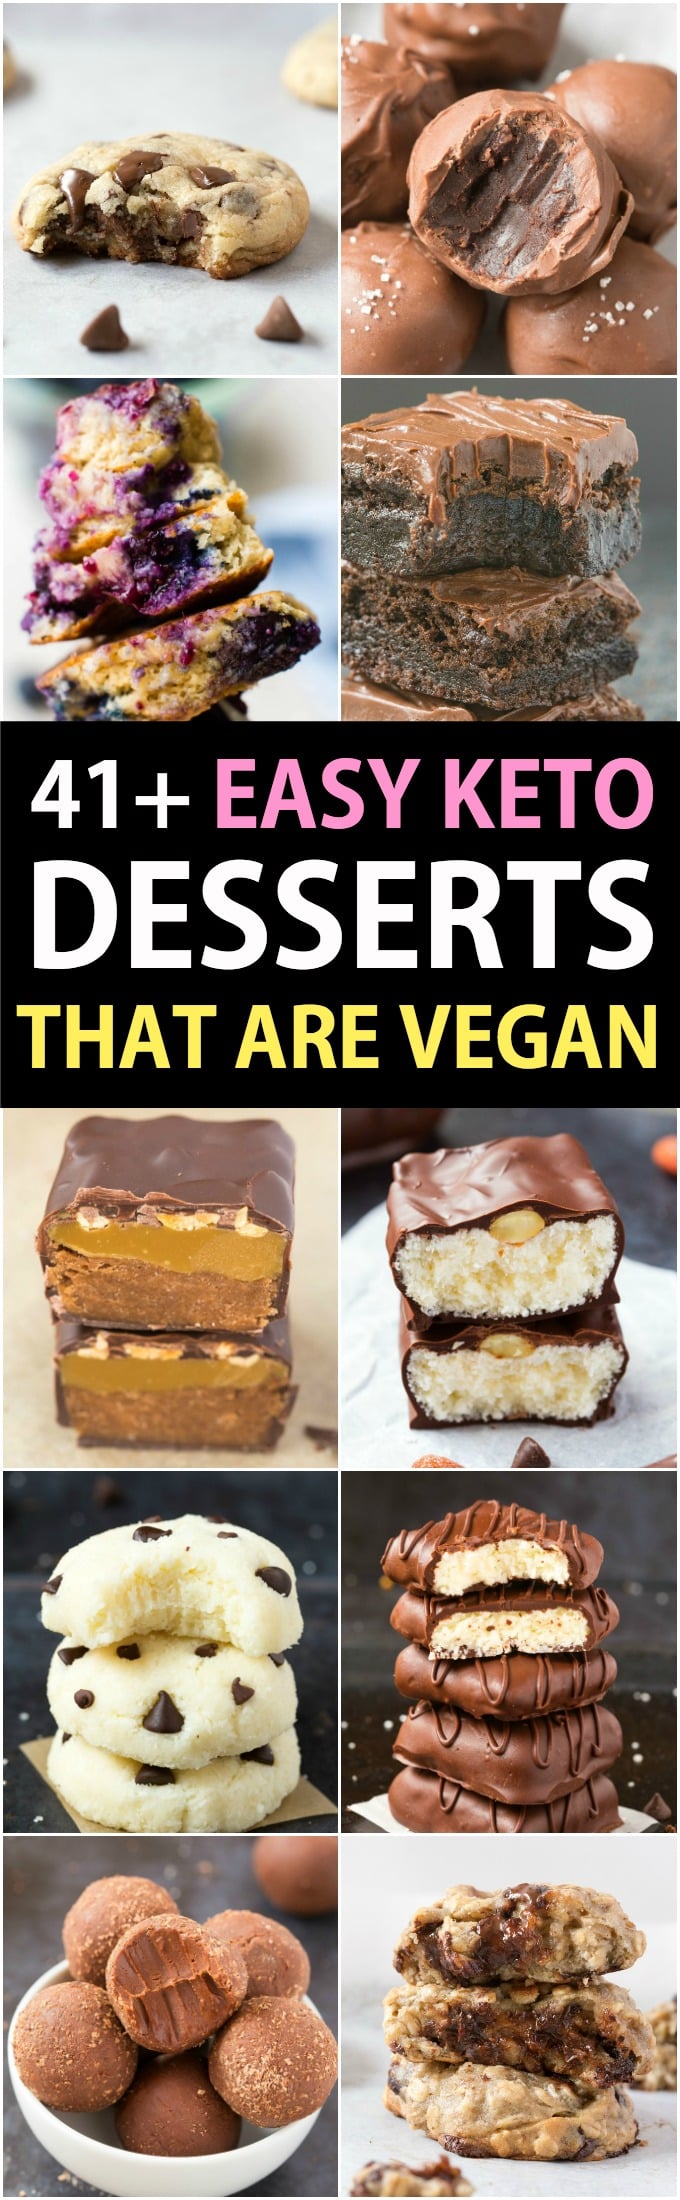 A collage of 10 vegan and keto desserts- No bake bars, cookies, brownies and candy. Text written says 41+ Easy Keto Friendly Dessert Recipes that are Vegan!